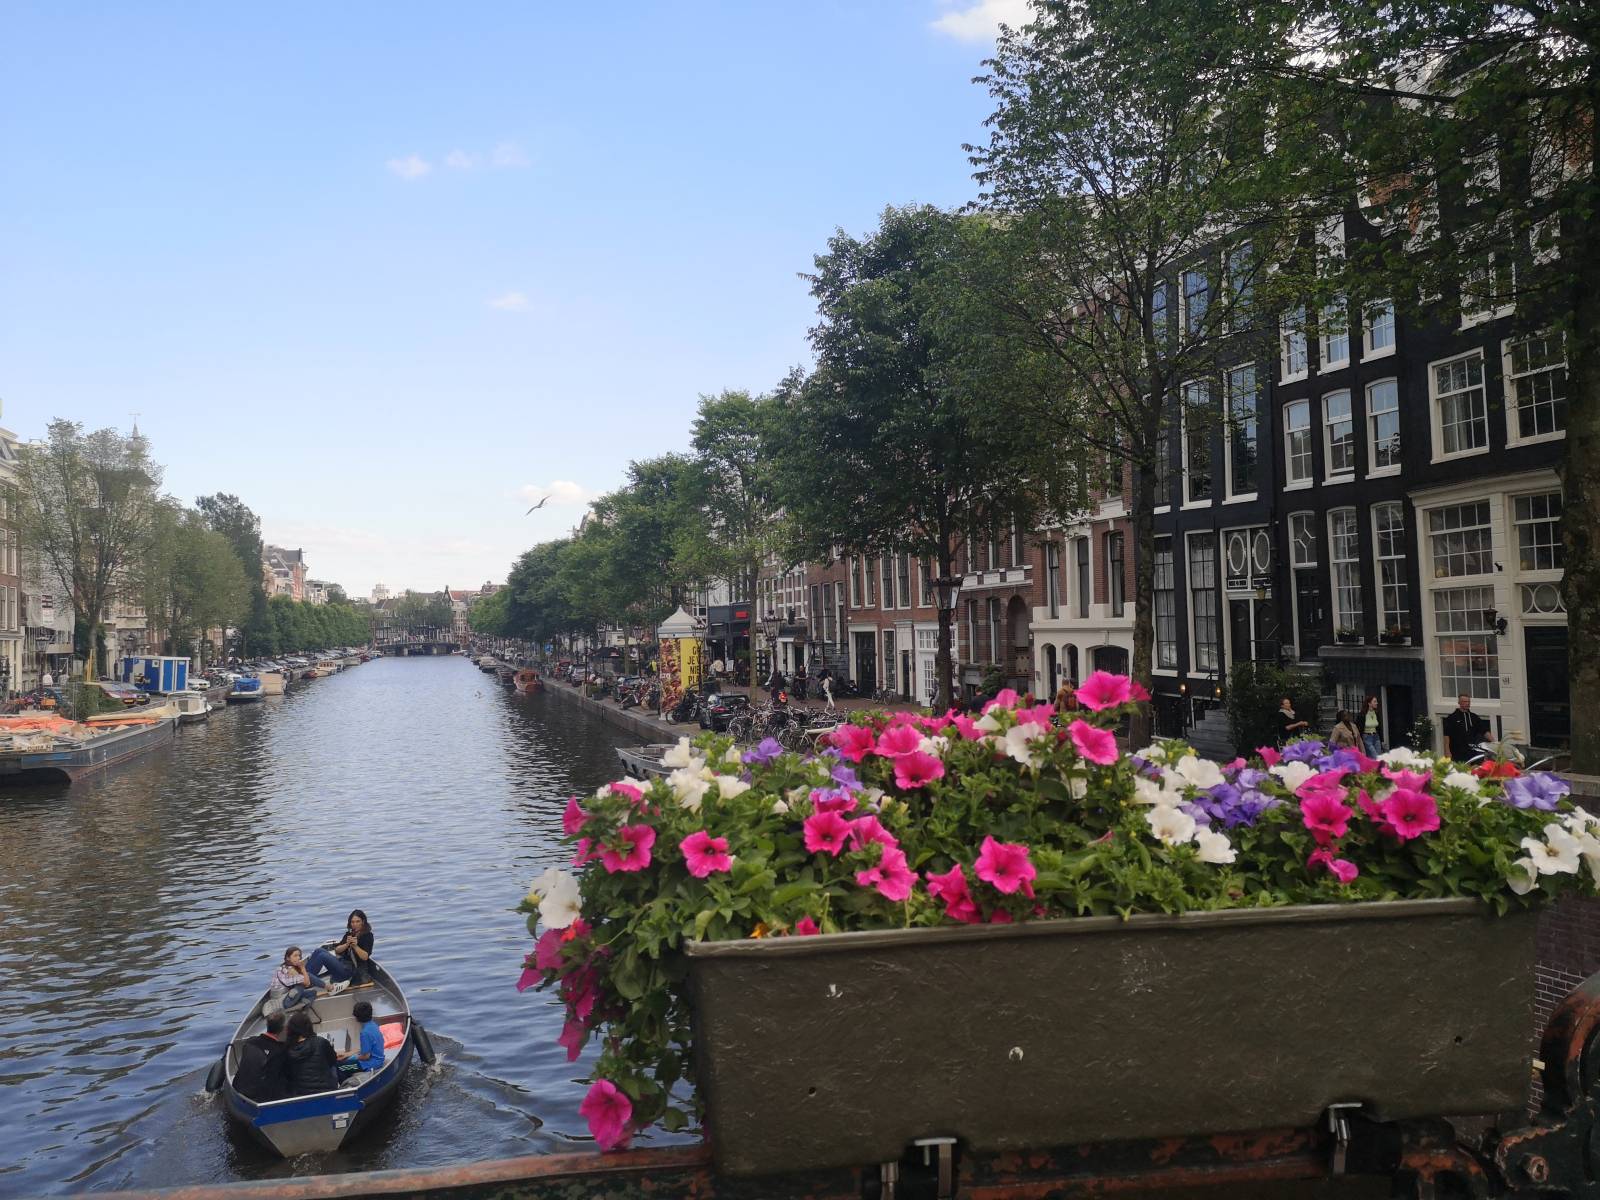 Boat on a river, flowers and houses in Amsterdam.